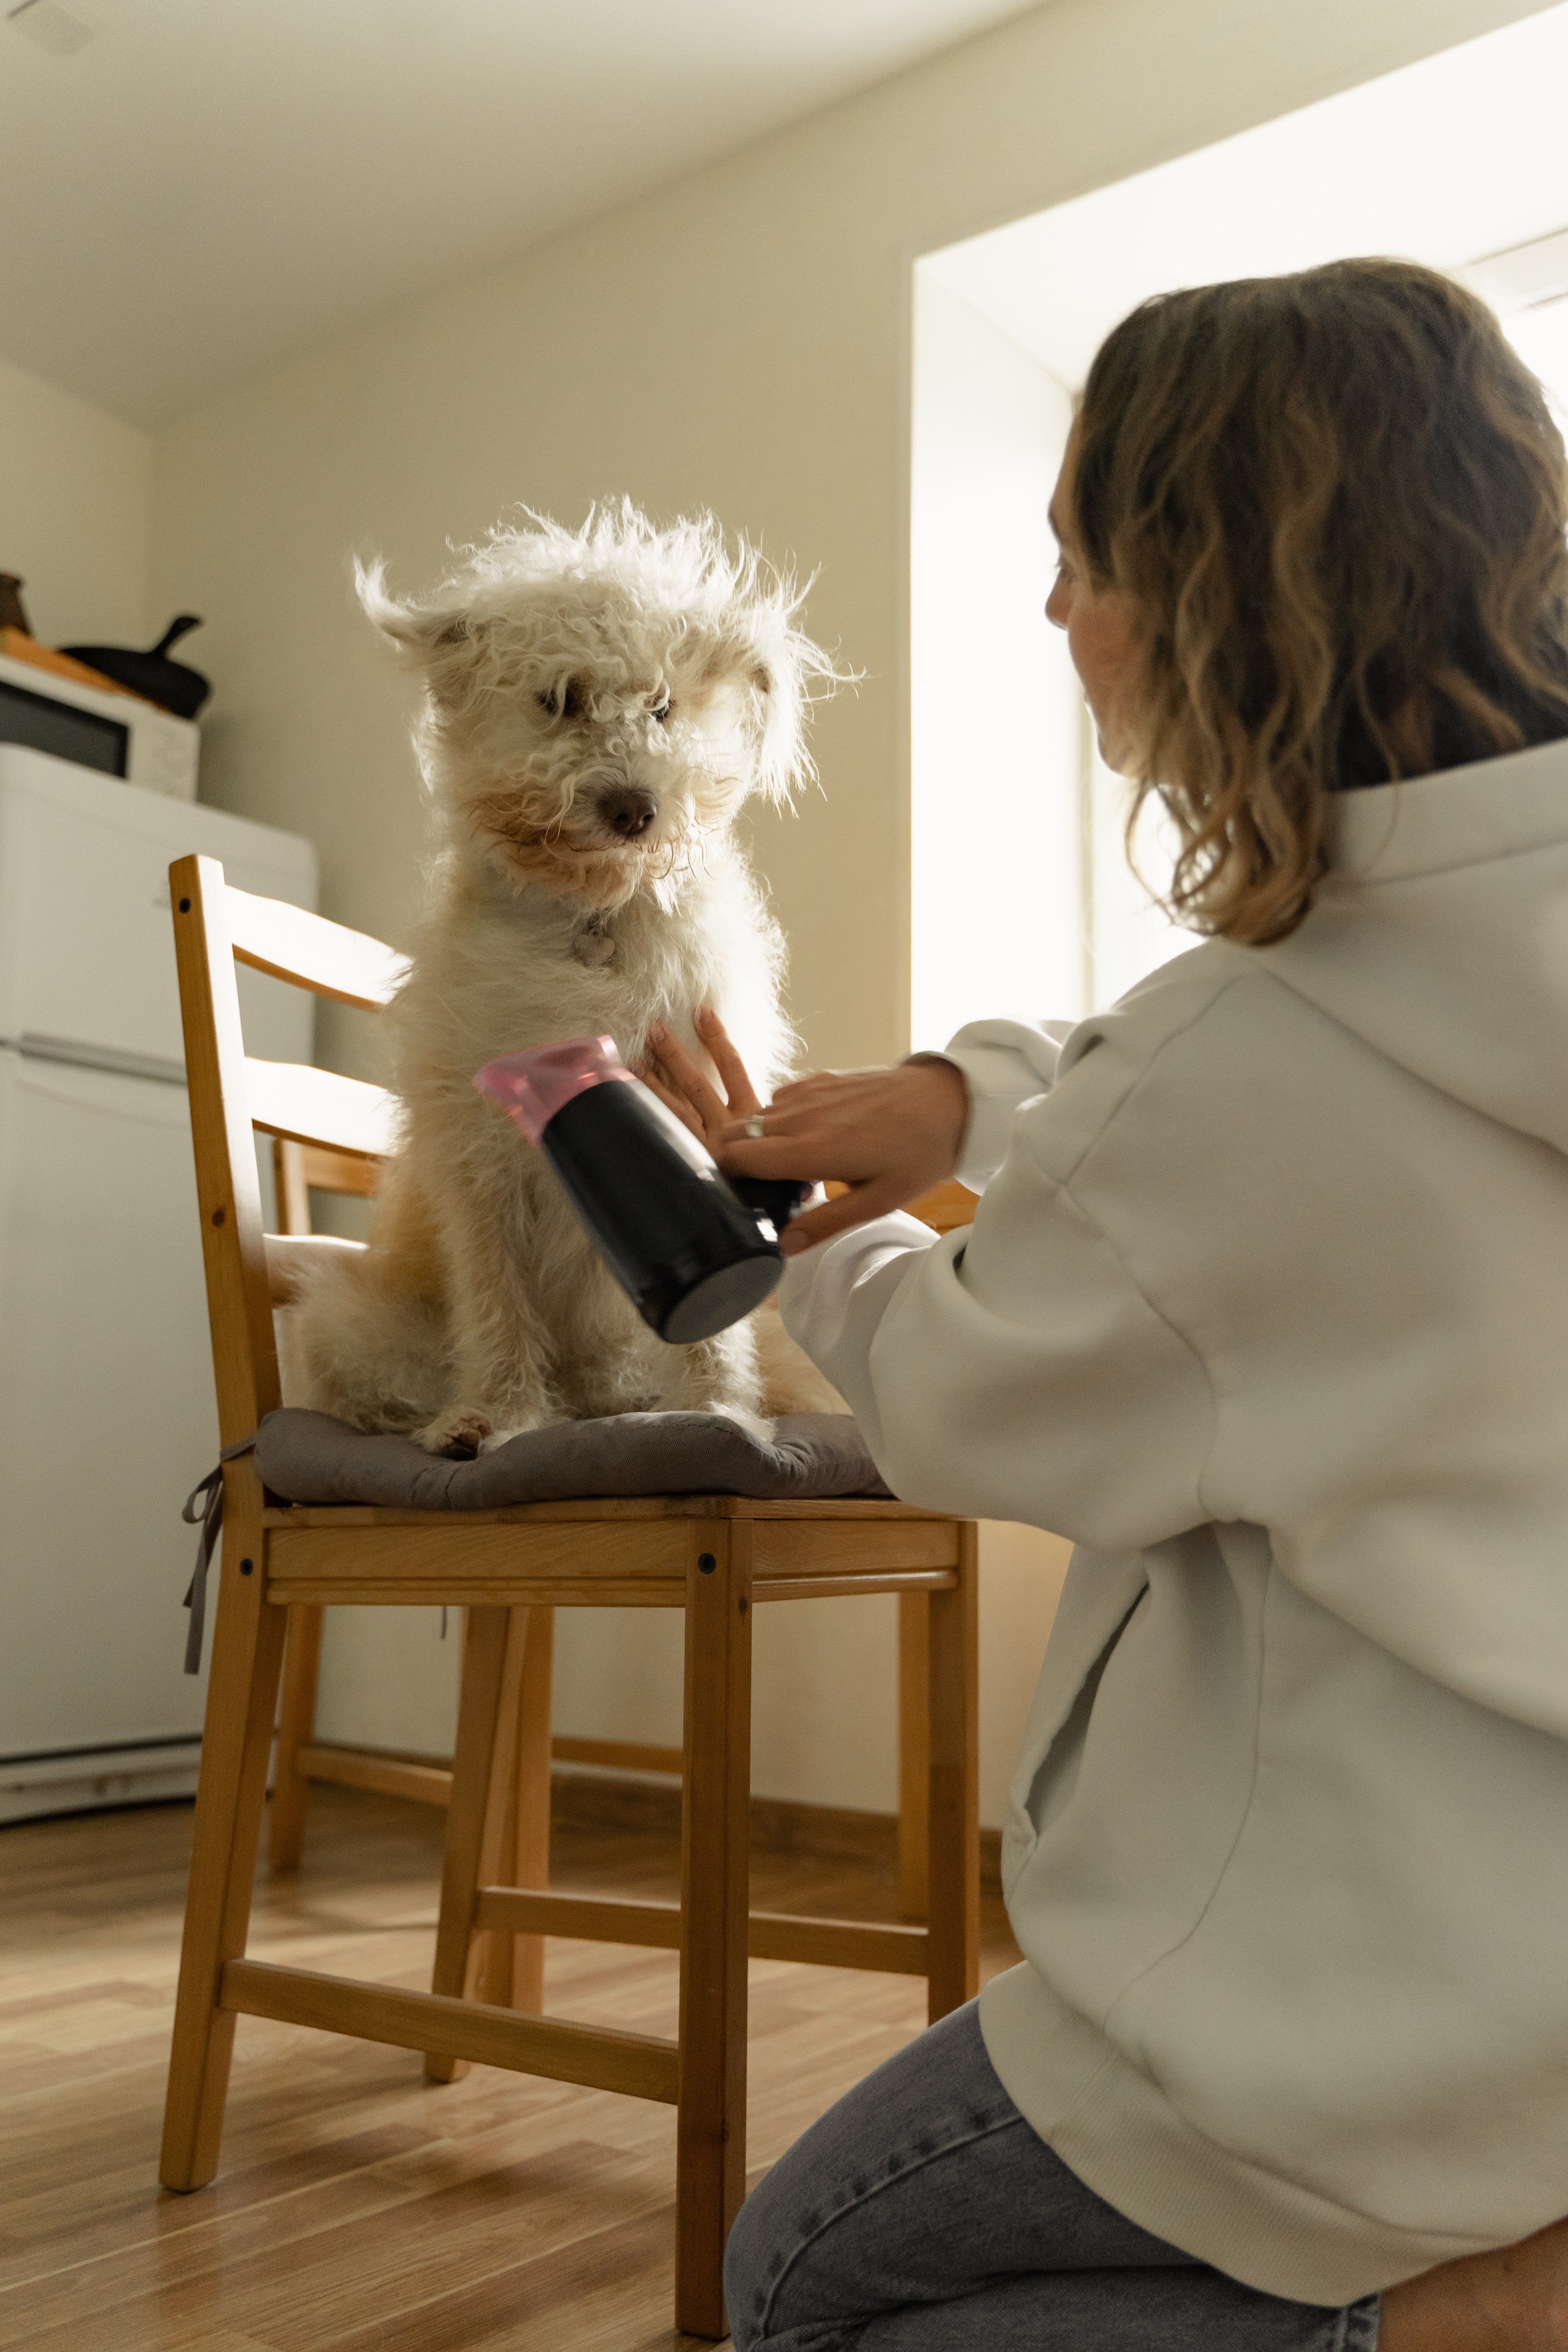 Top 10 Dog Grooming Tips for a Healthy and Happy Pup